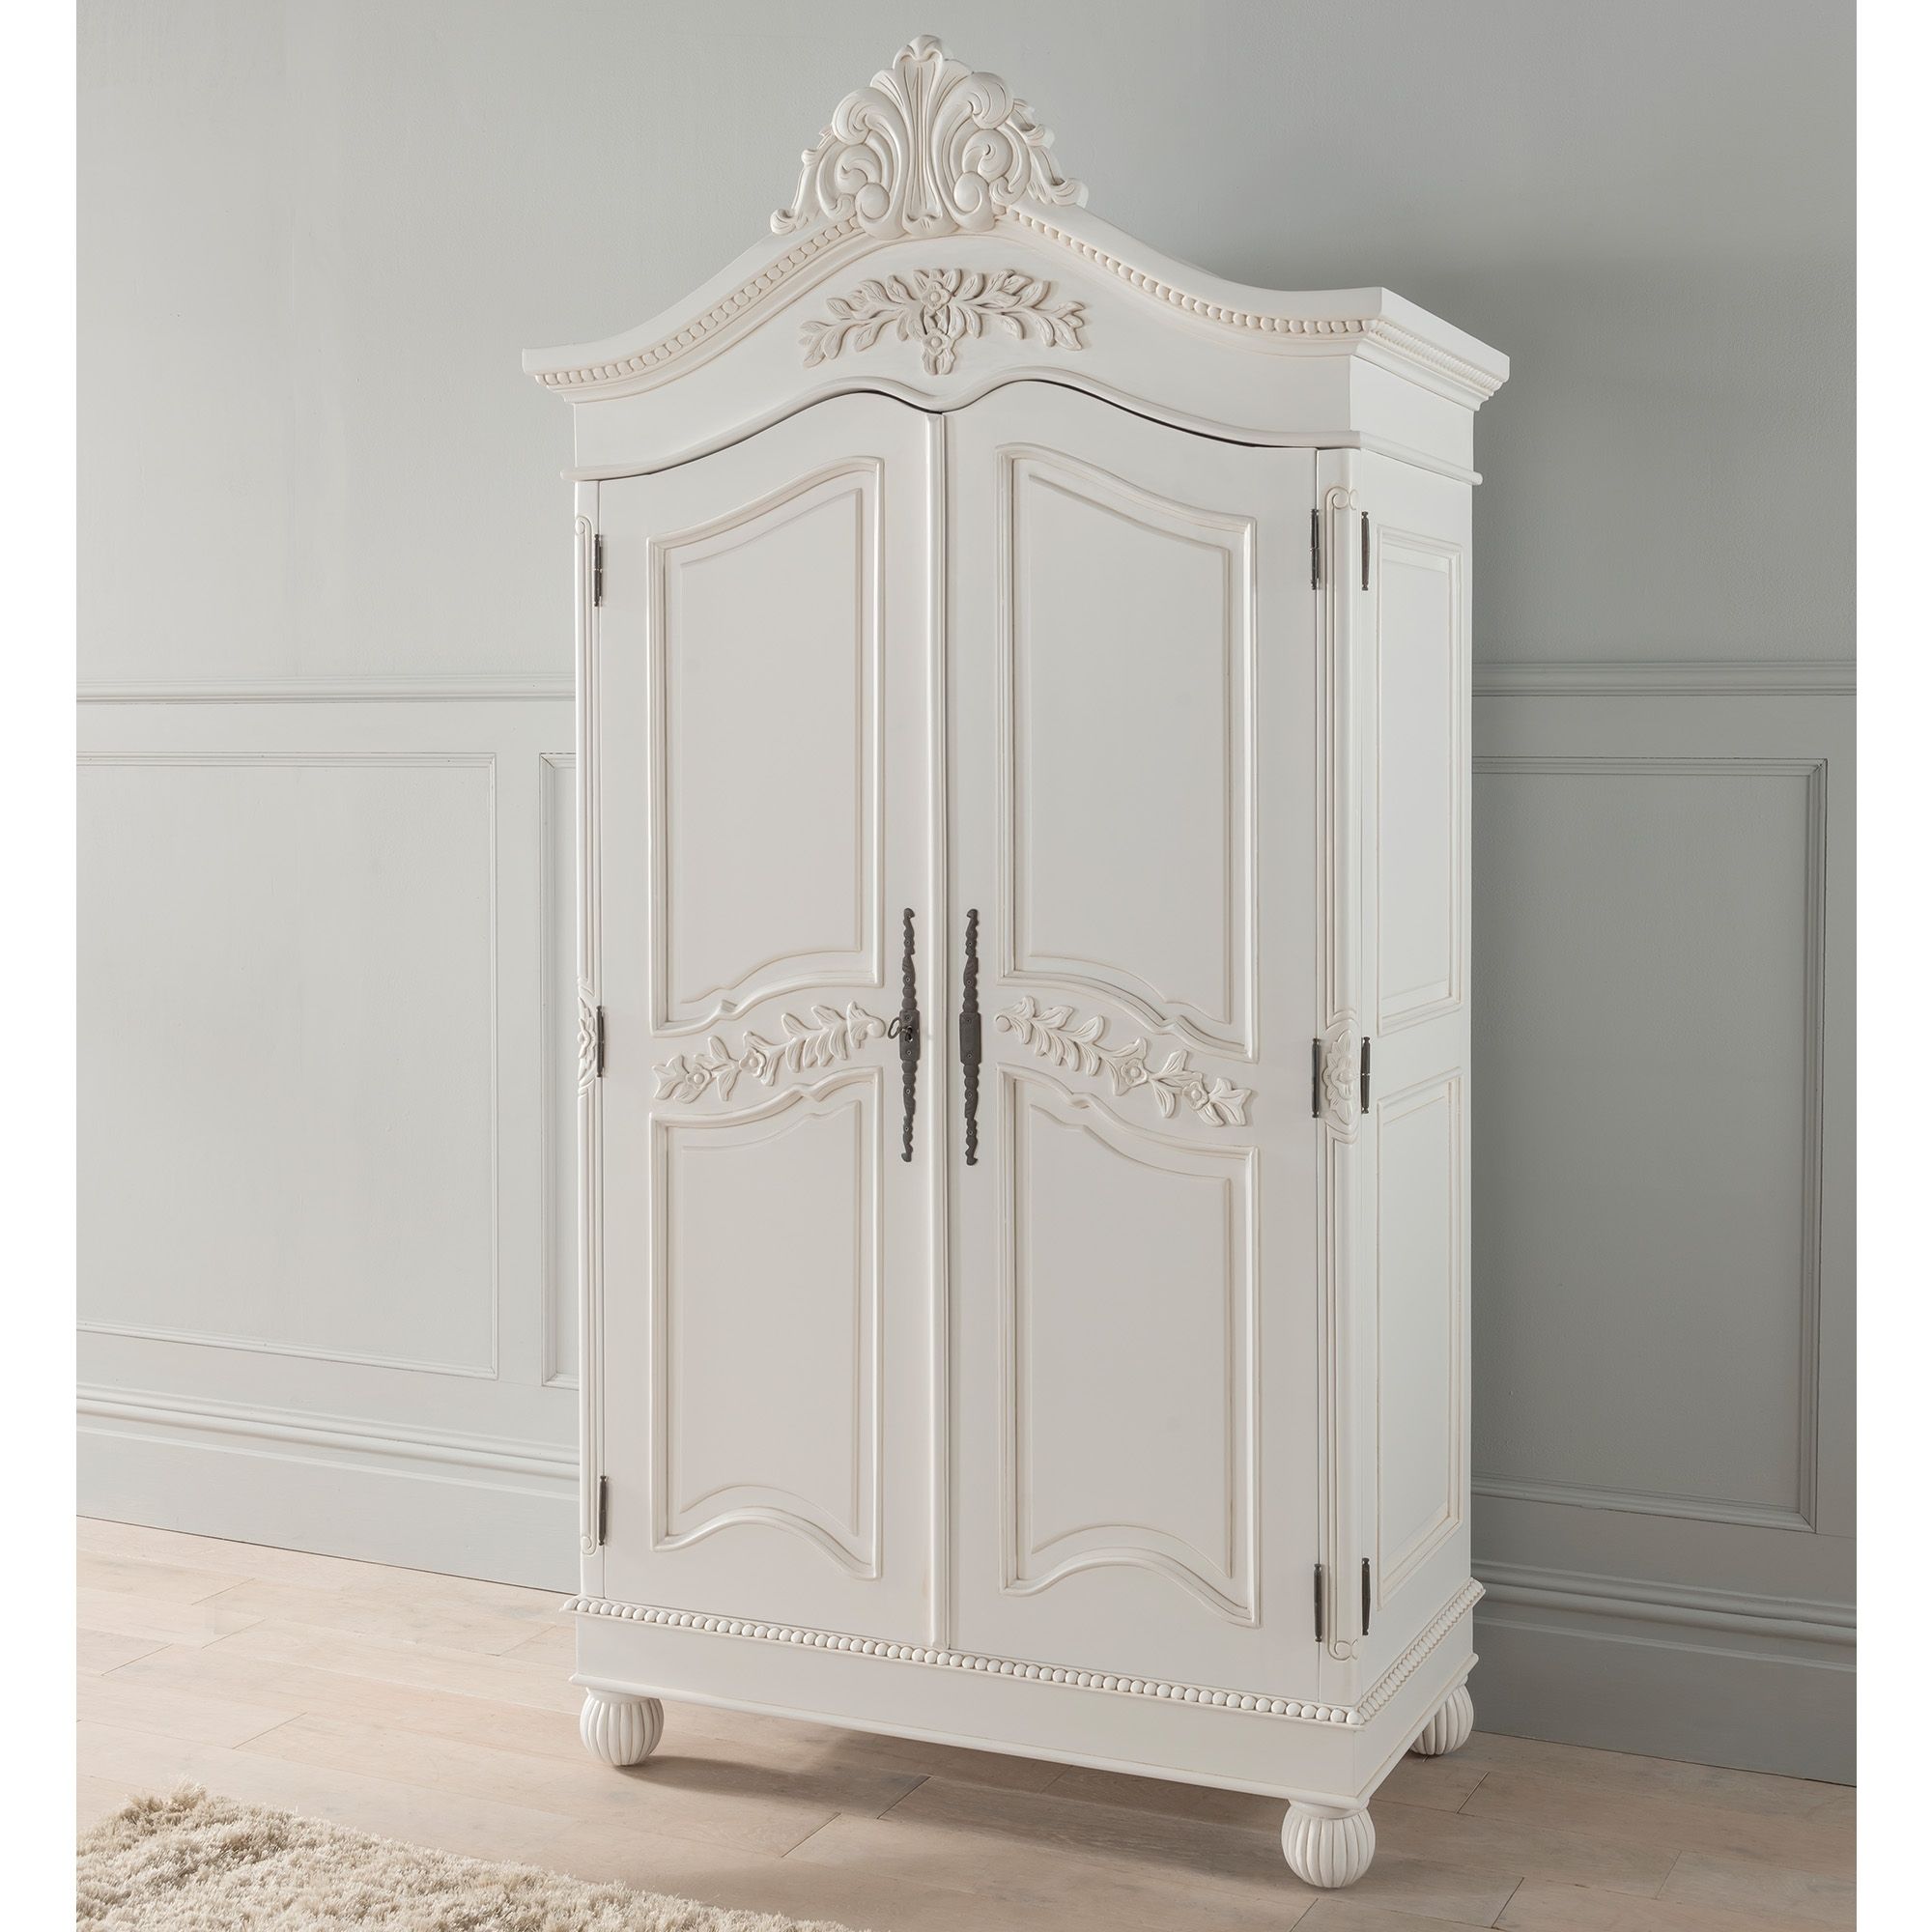 Antique French Style Wardrobe | Shabby Chic Bedroom Furniture Within White Shabby Chic Wardrobes (View 13 of 15)